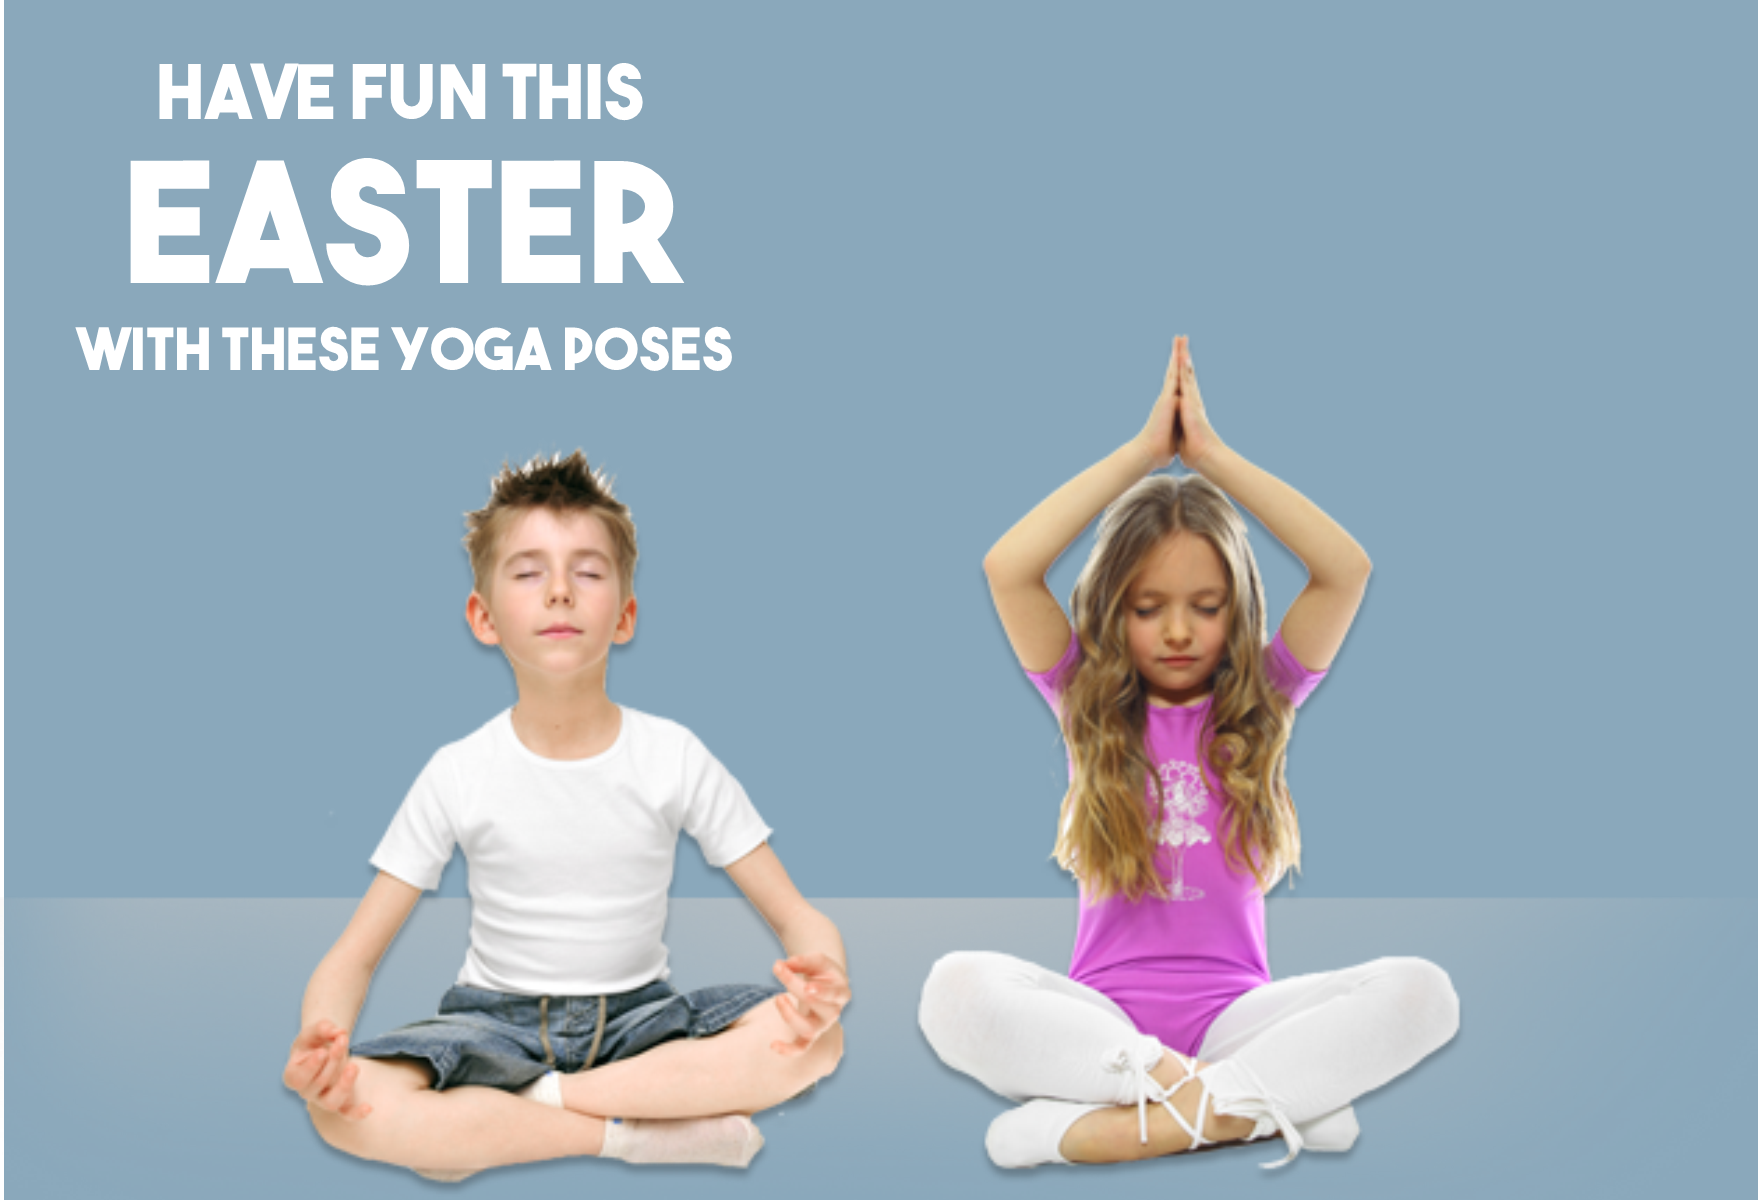 Fun Yoga Poses For Kids This Easter – durham house and studio